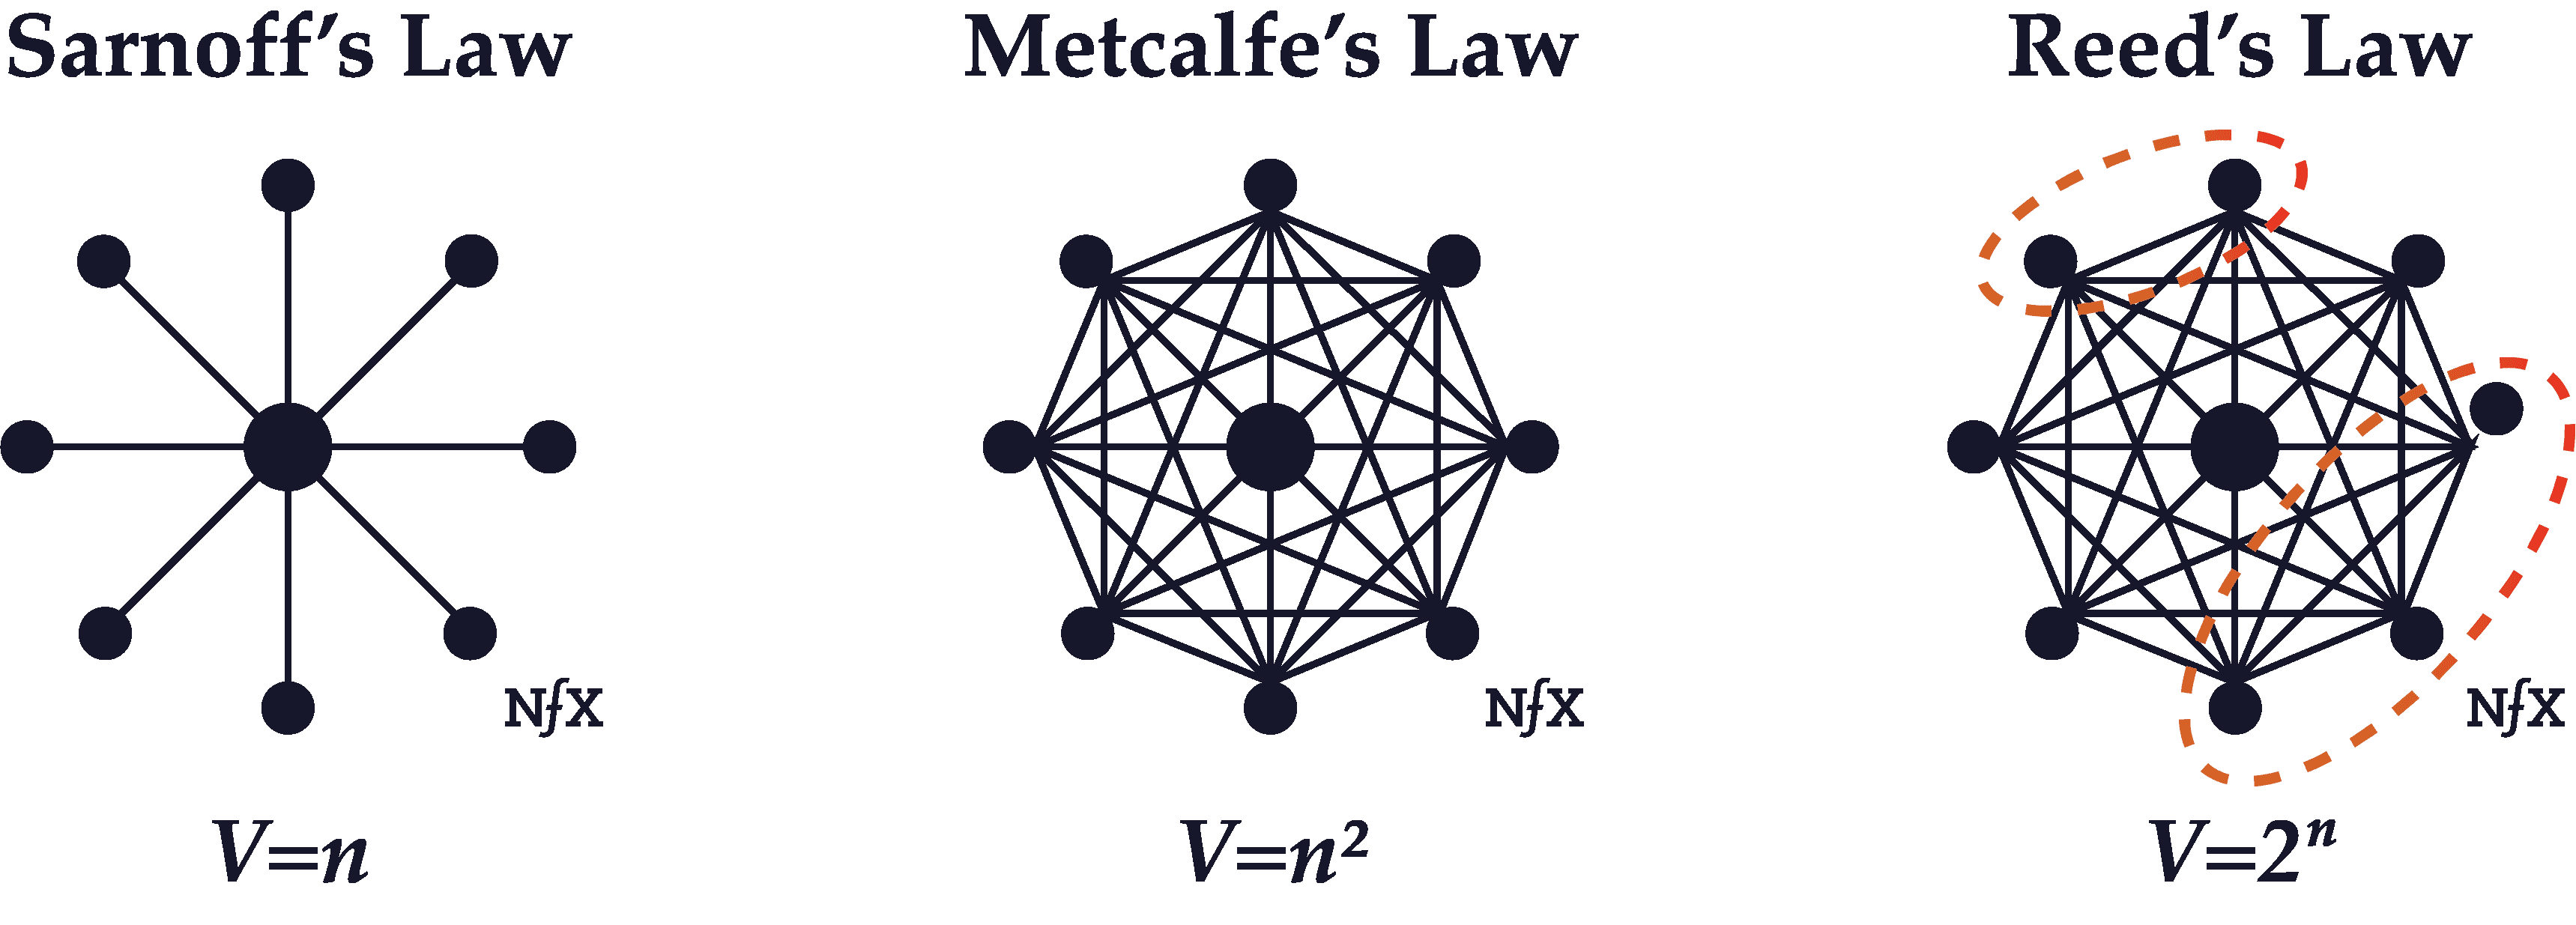 The Network Laws